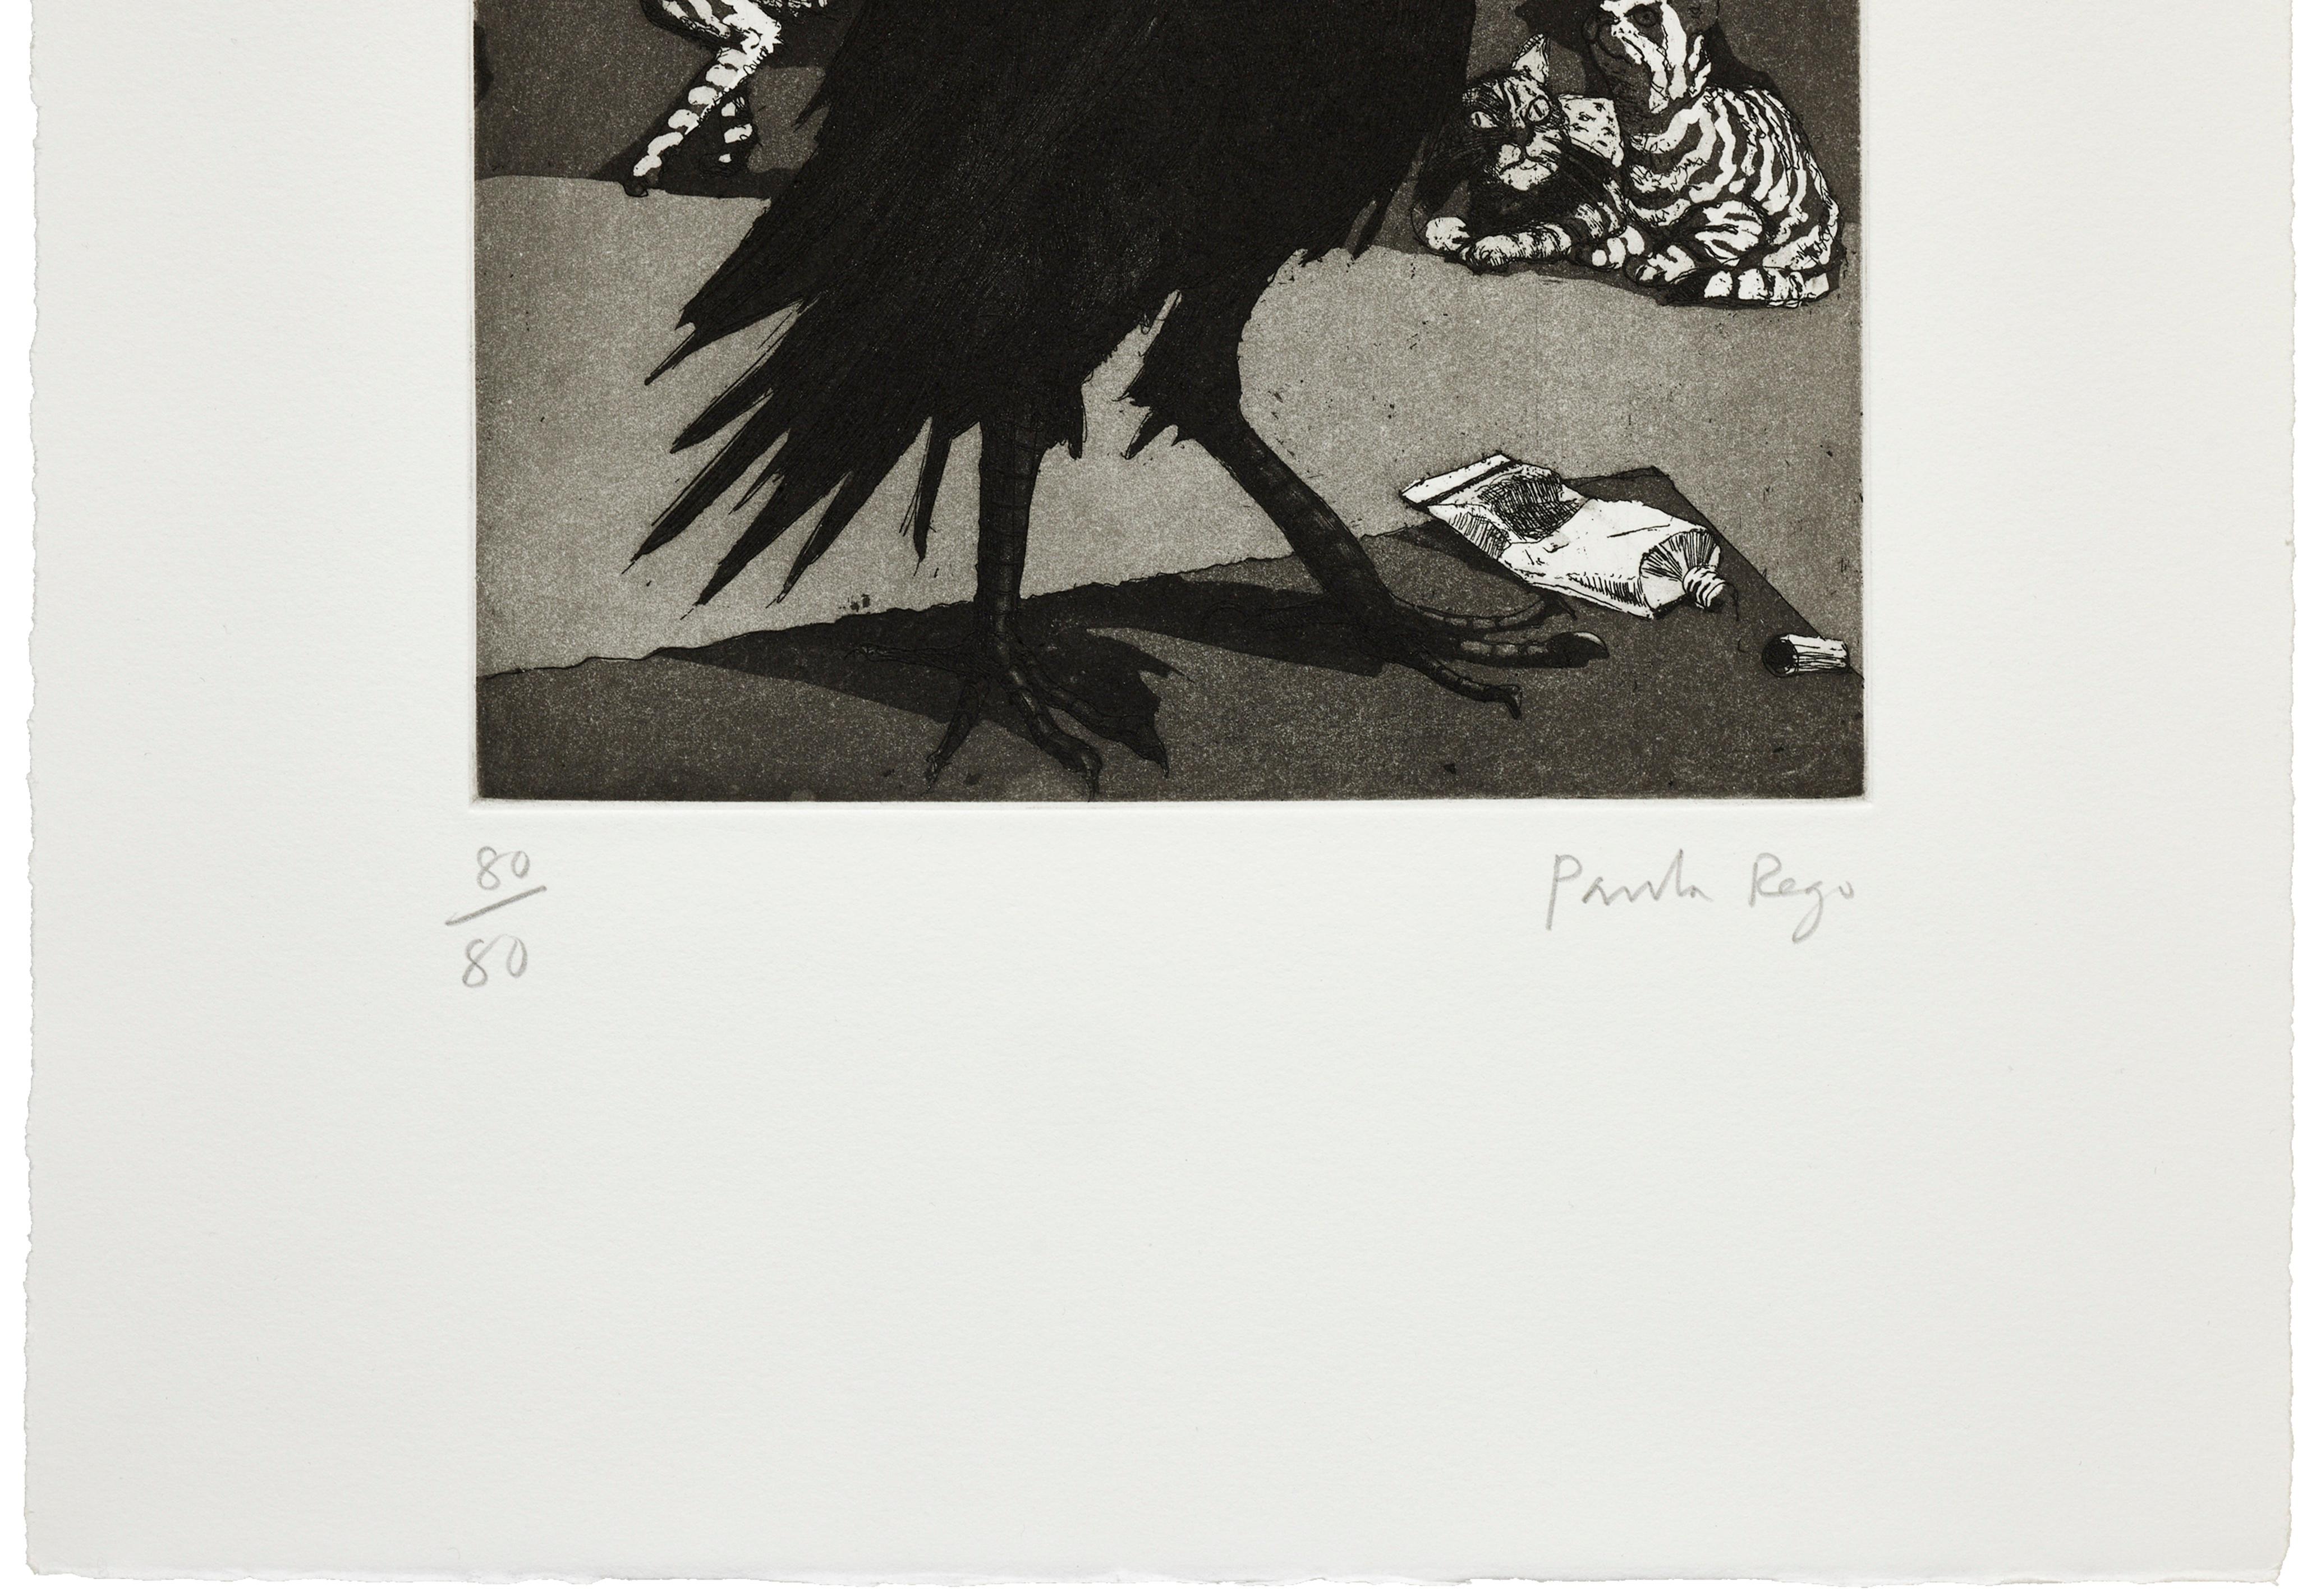 Crow, 1994
Paula Rego

Etching with aquatint, on Somerset wove
Signed and numbered from the edition of 80
From the Nine London Birds
Printed by Caulford Press, London
Published by the Byam Shaw School of Art, London
Plate: 22.4 x 18.7 cm (8.8 × 7.4